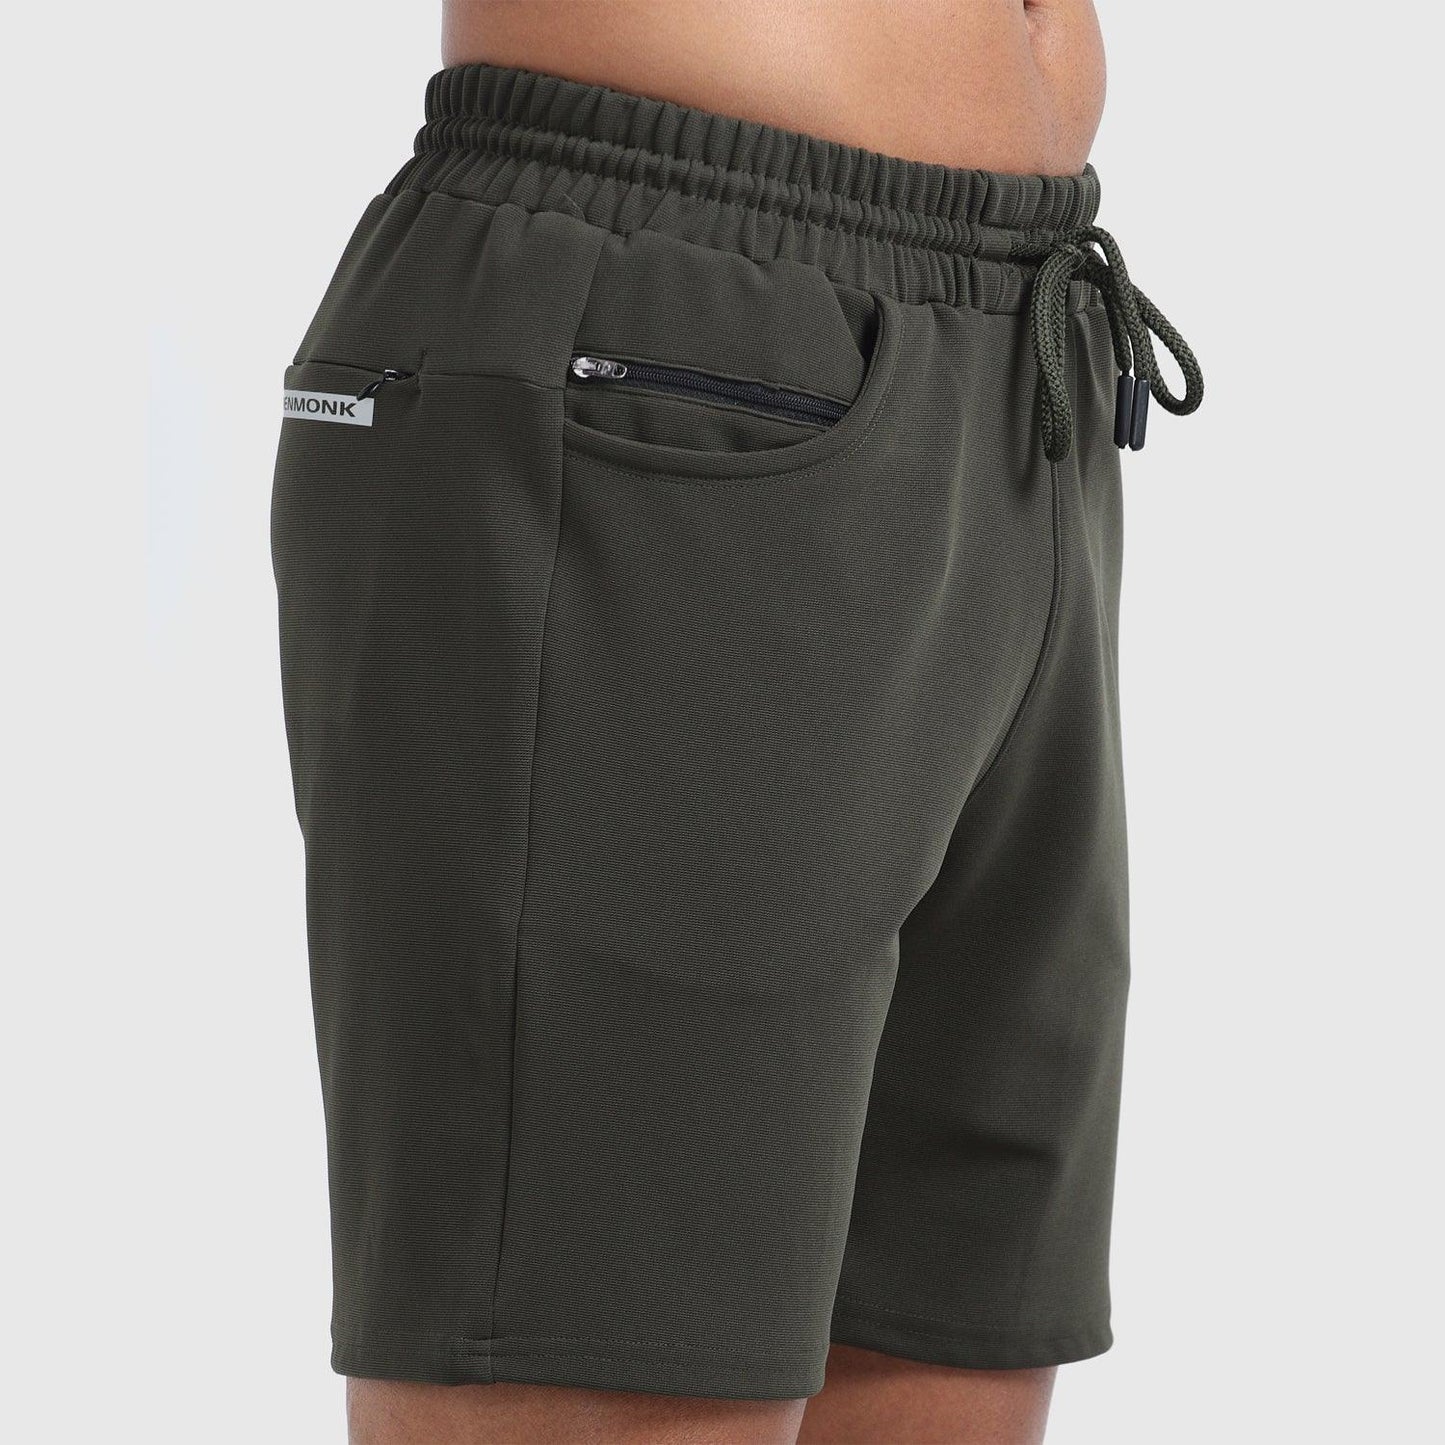 Denmonk's fashionable Retroglide Shorts core olive shorts for men will boost your level of gym fitness.